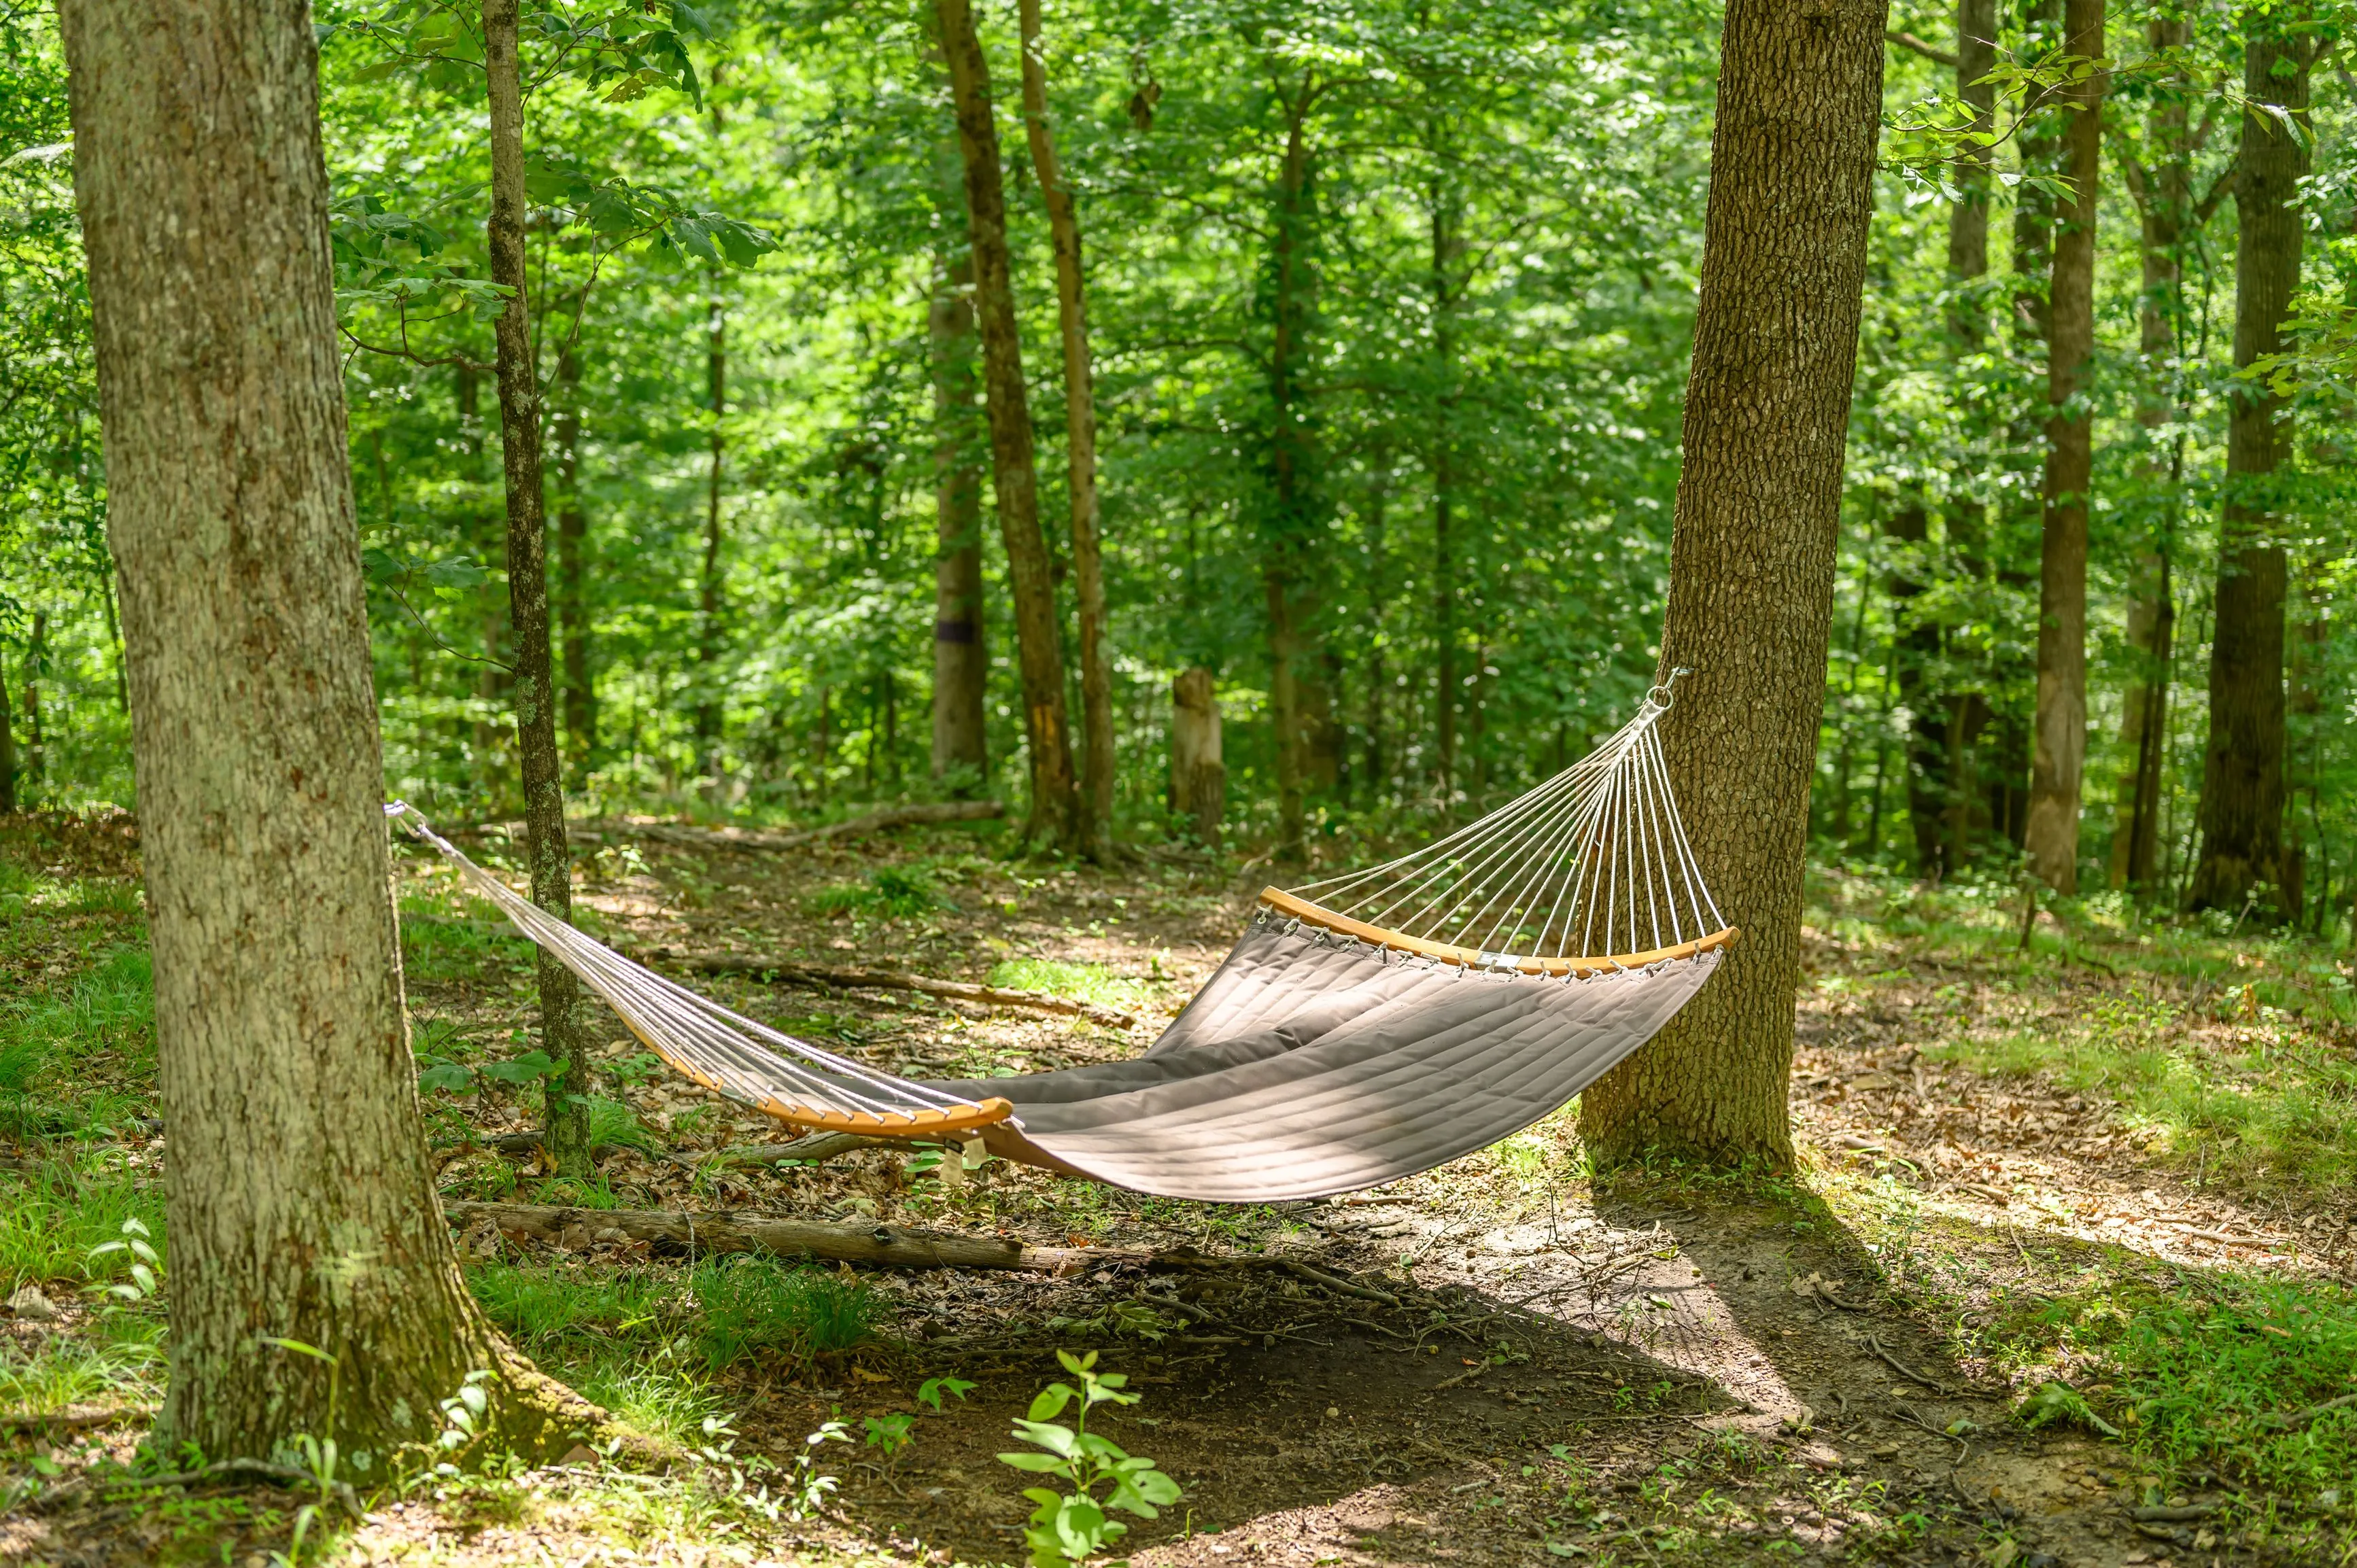 Empty hammock tied between two trees in a peaceful forest setting.